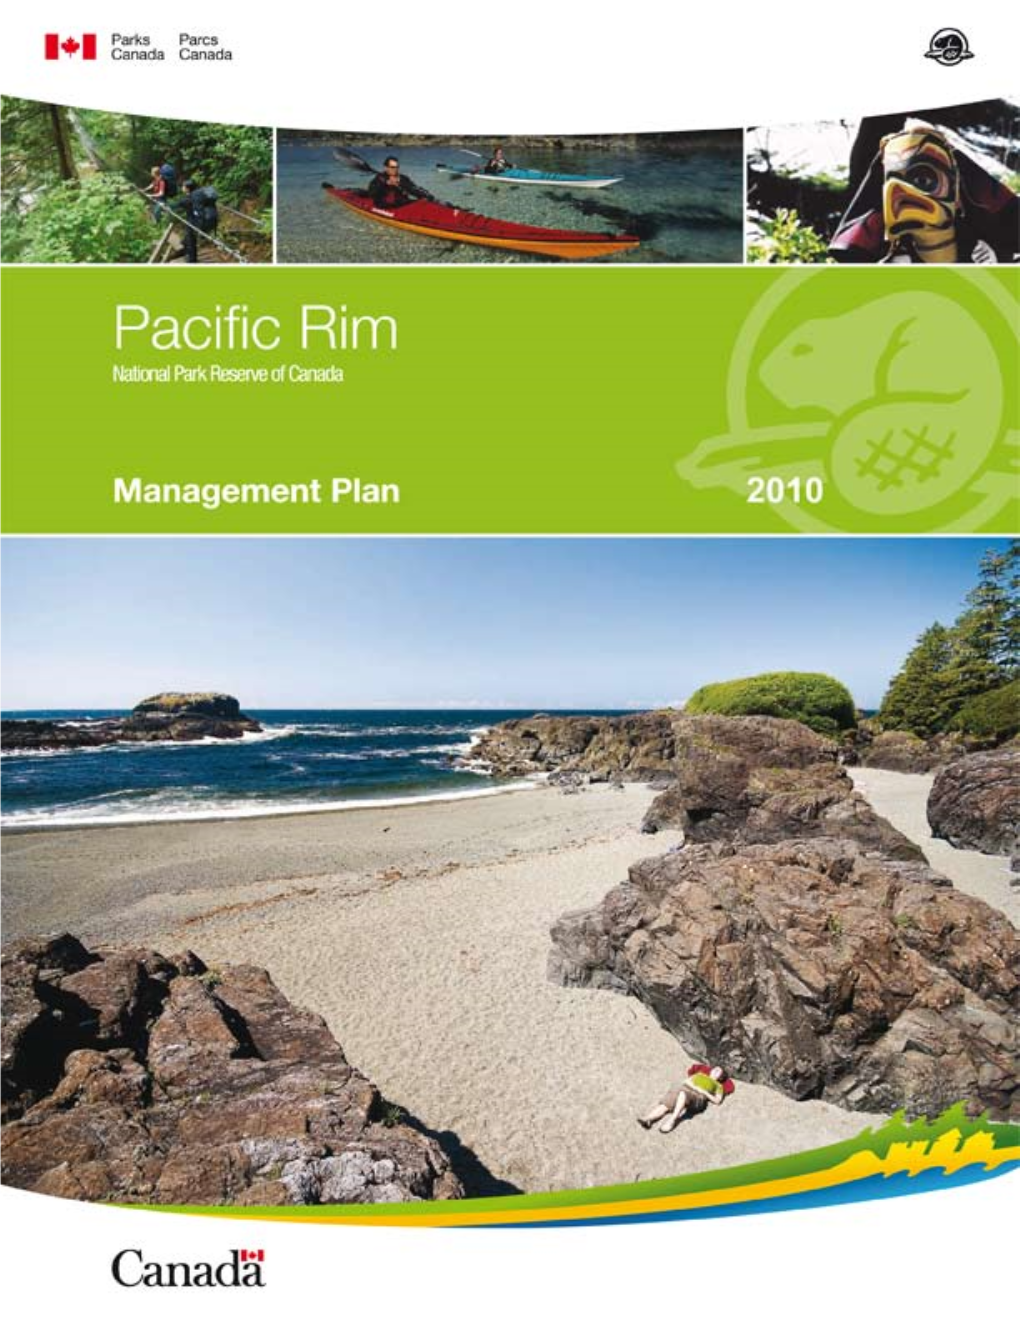 Pacific Rim National Park Reserve of Canada: Available Also on the Internet and on CD-ROM